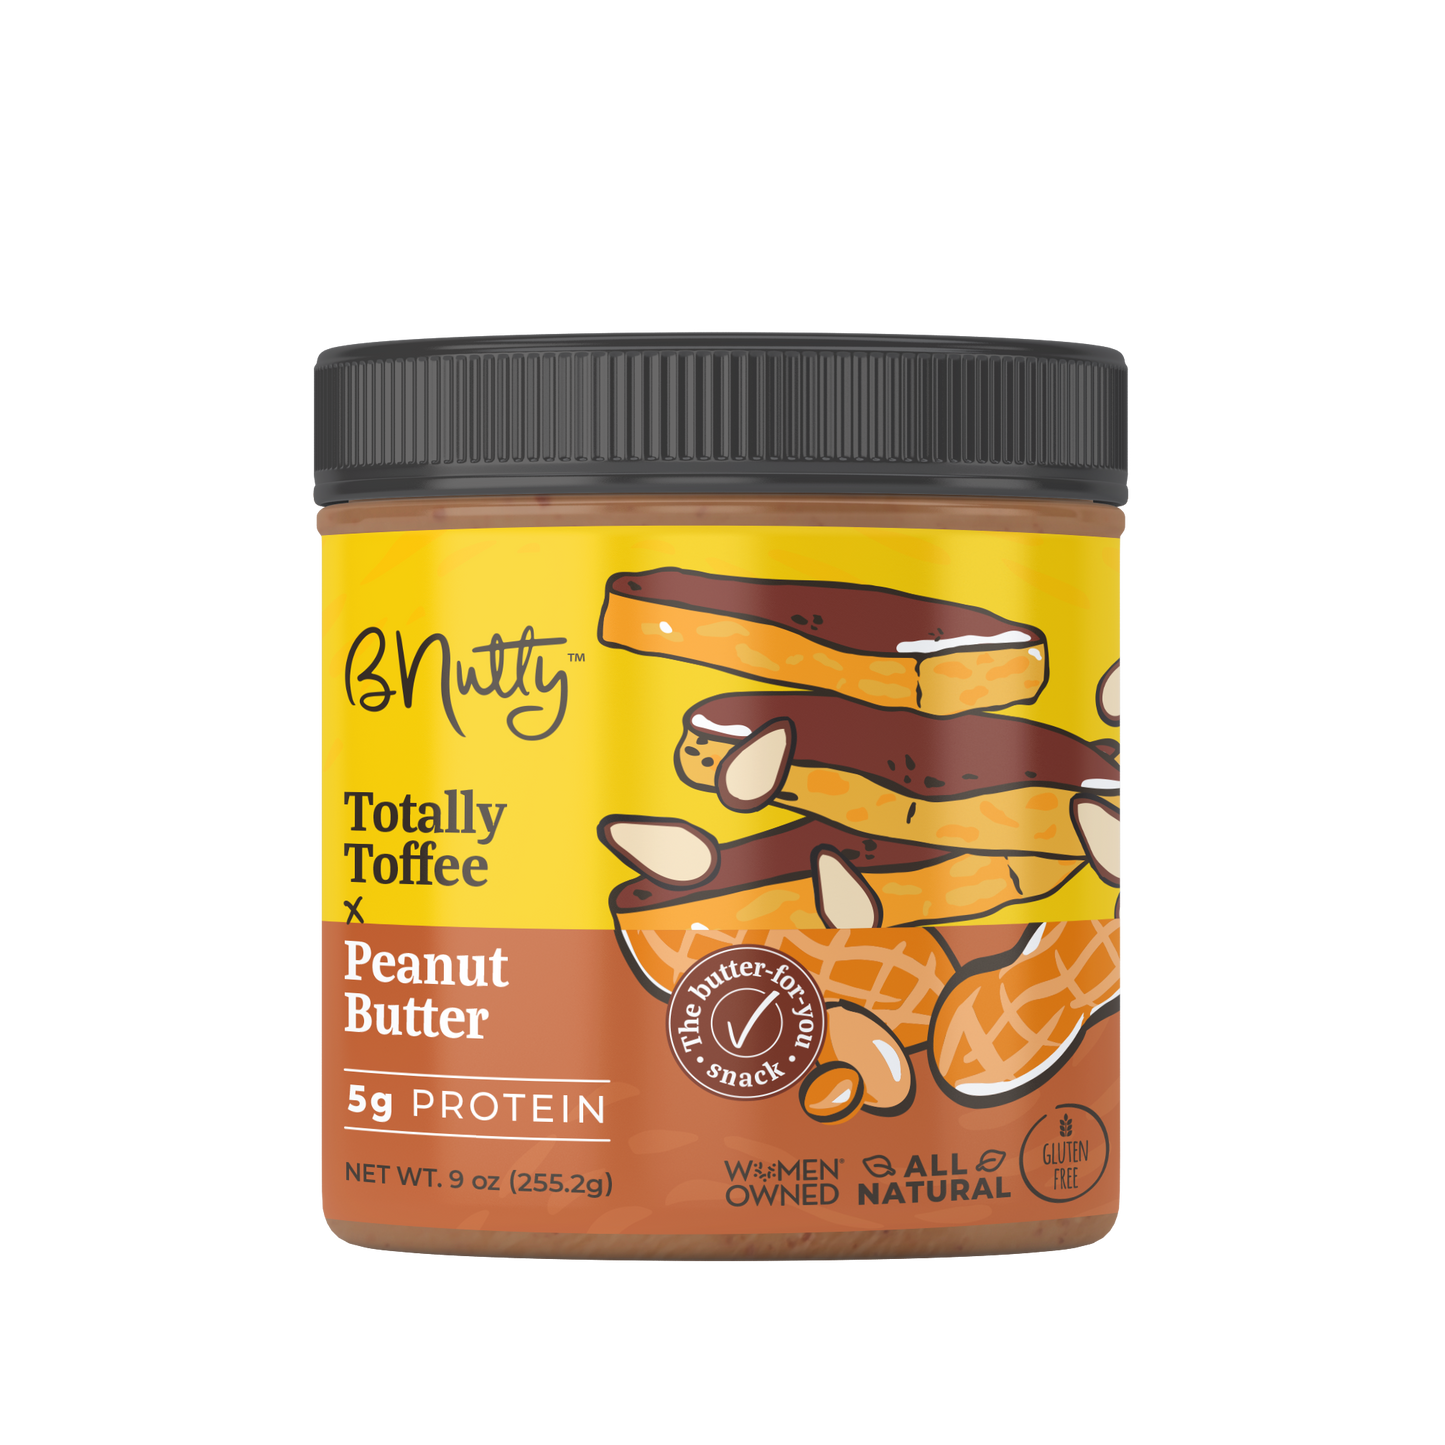 BNutty Totally Toffee Peanut Butter Spread